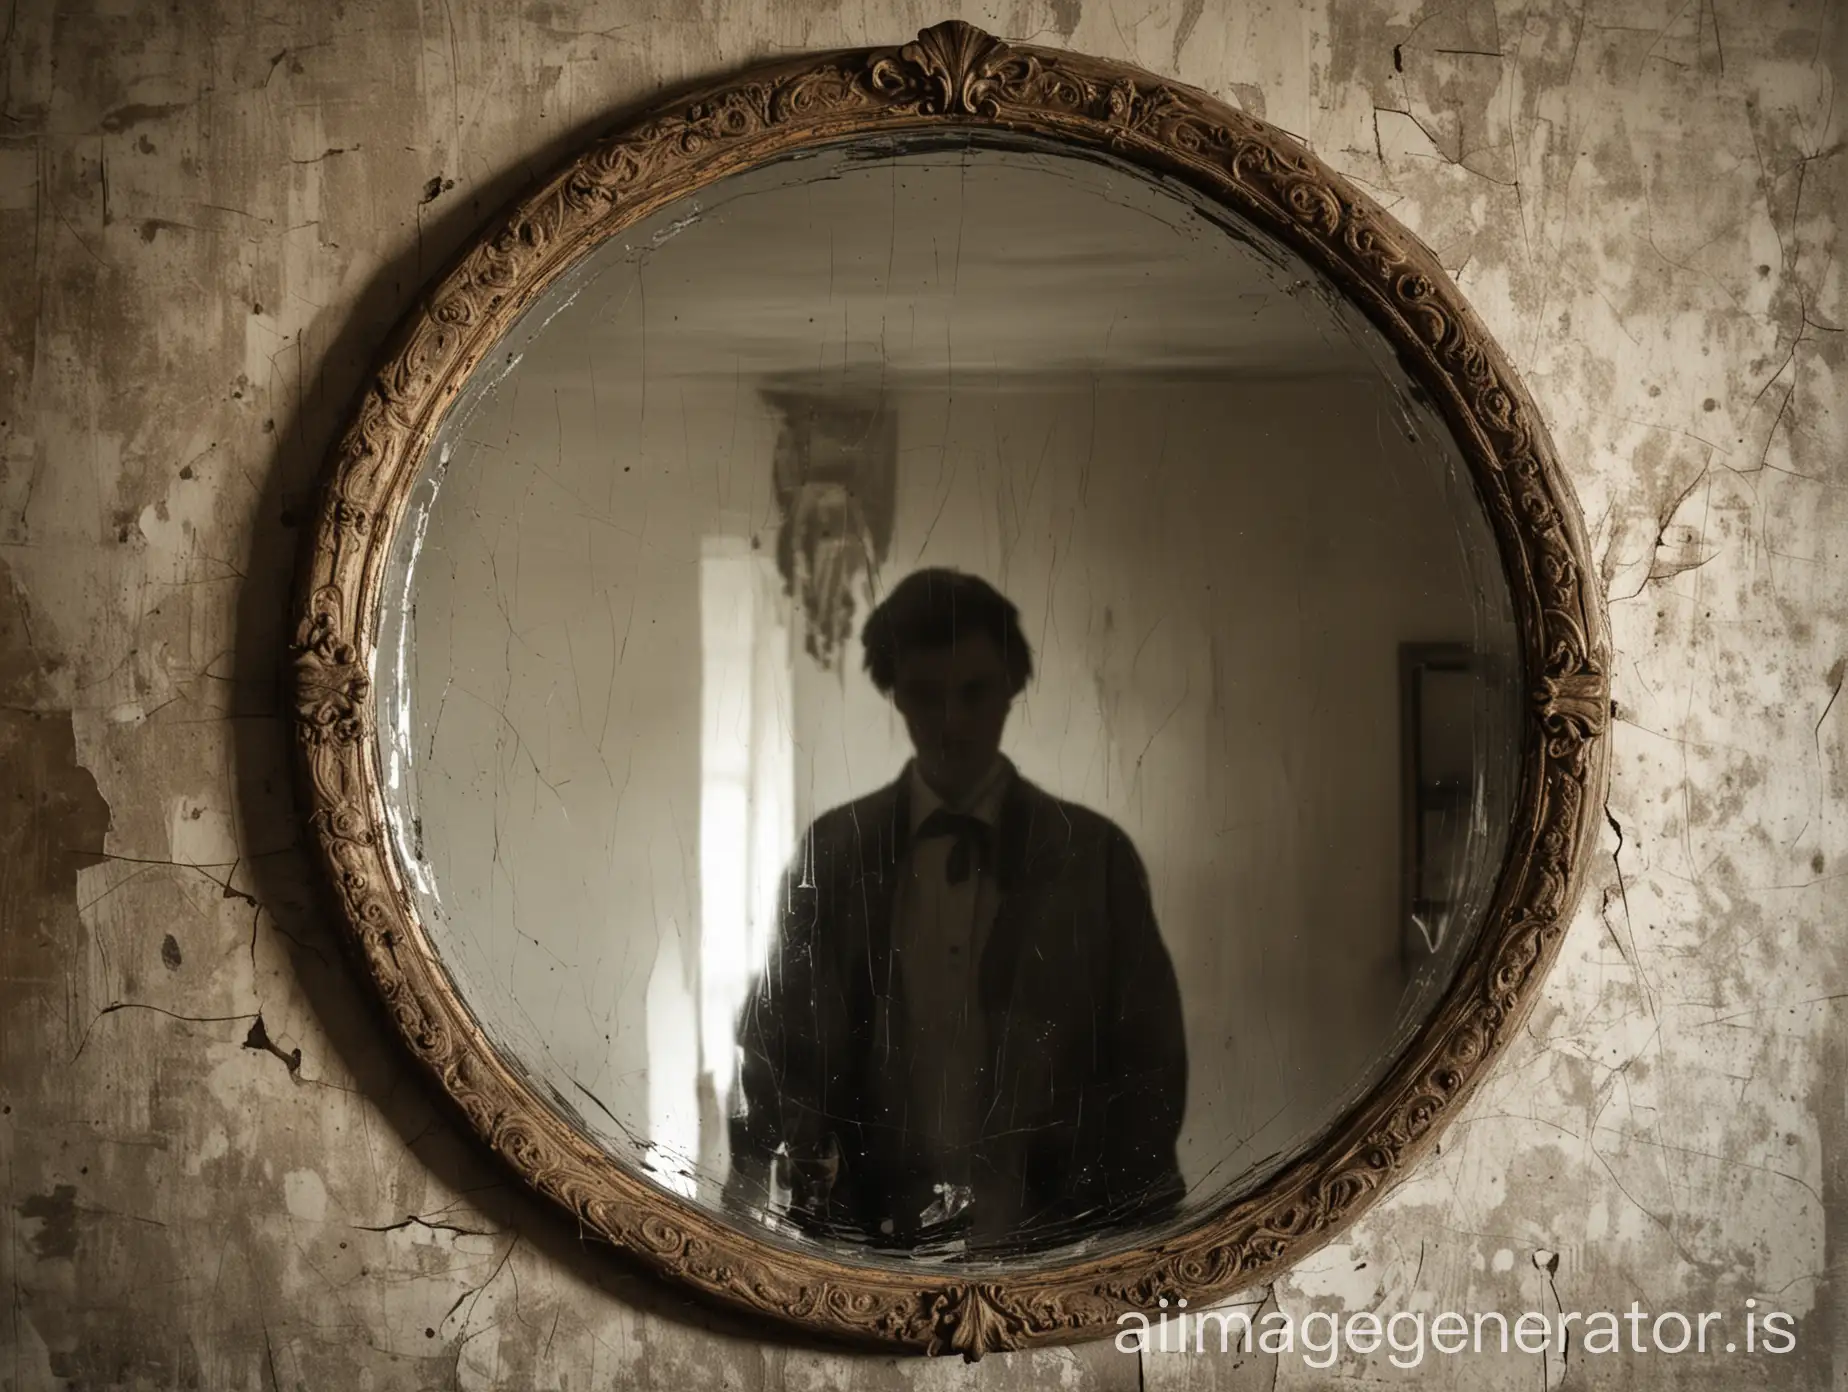 A cracked antique mirror with a shadowy figure reflected in it.